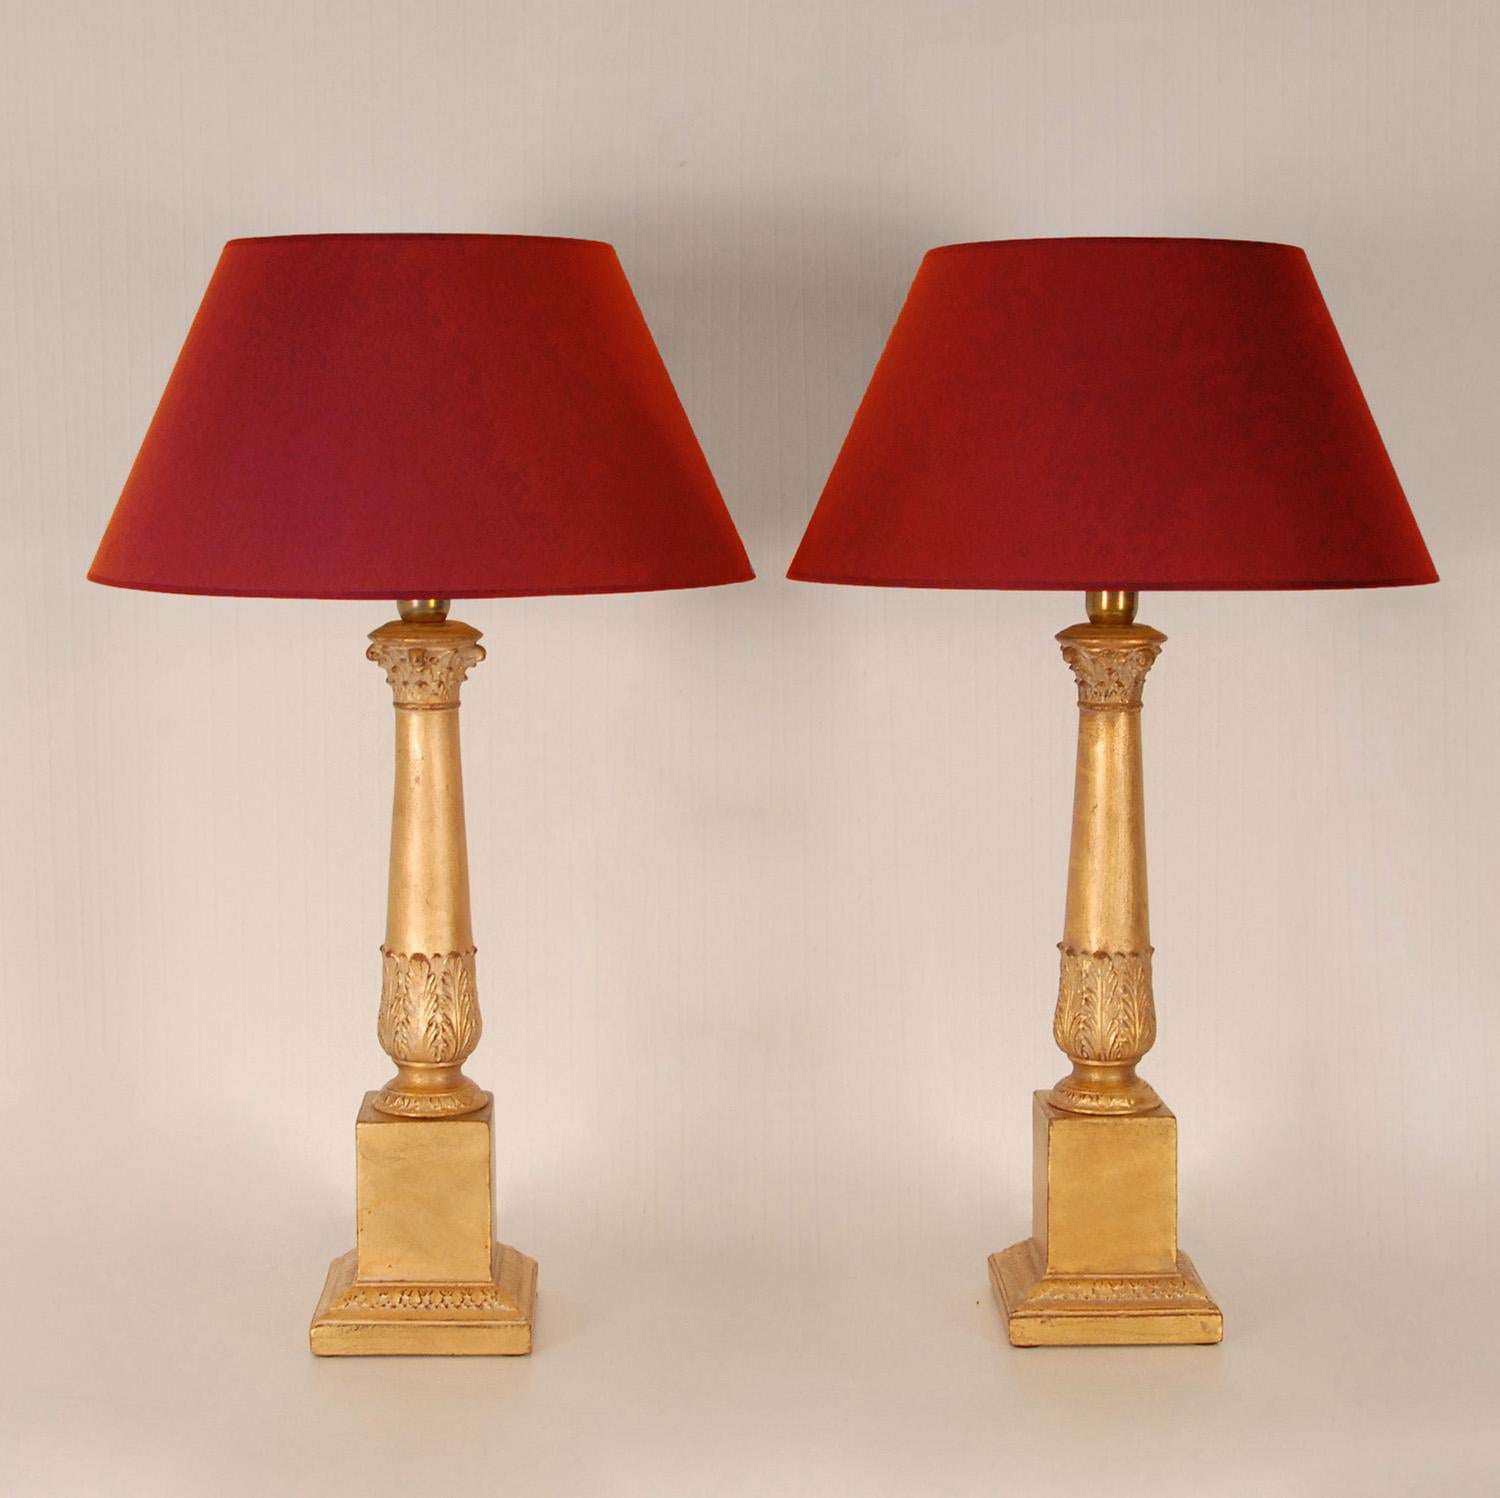 Vintage Italian Ceramic Lamps Gold Gilded Corinthian Column Table Lamps a Pair For Sale 7